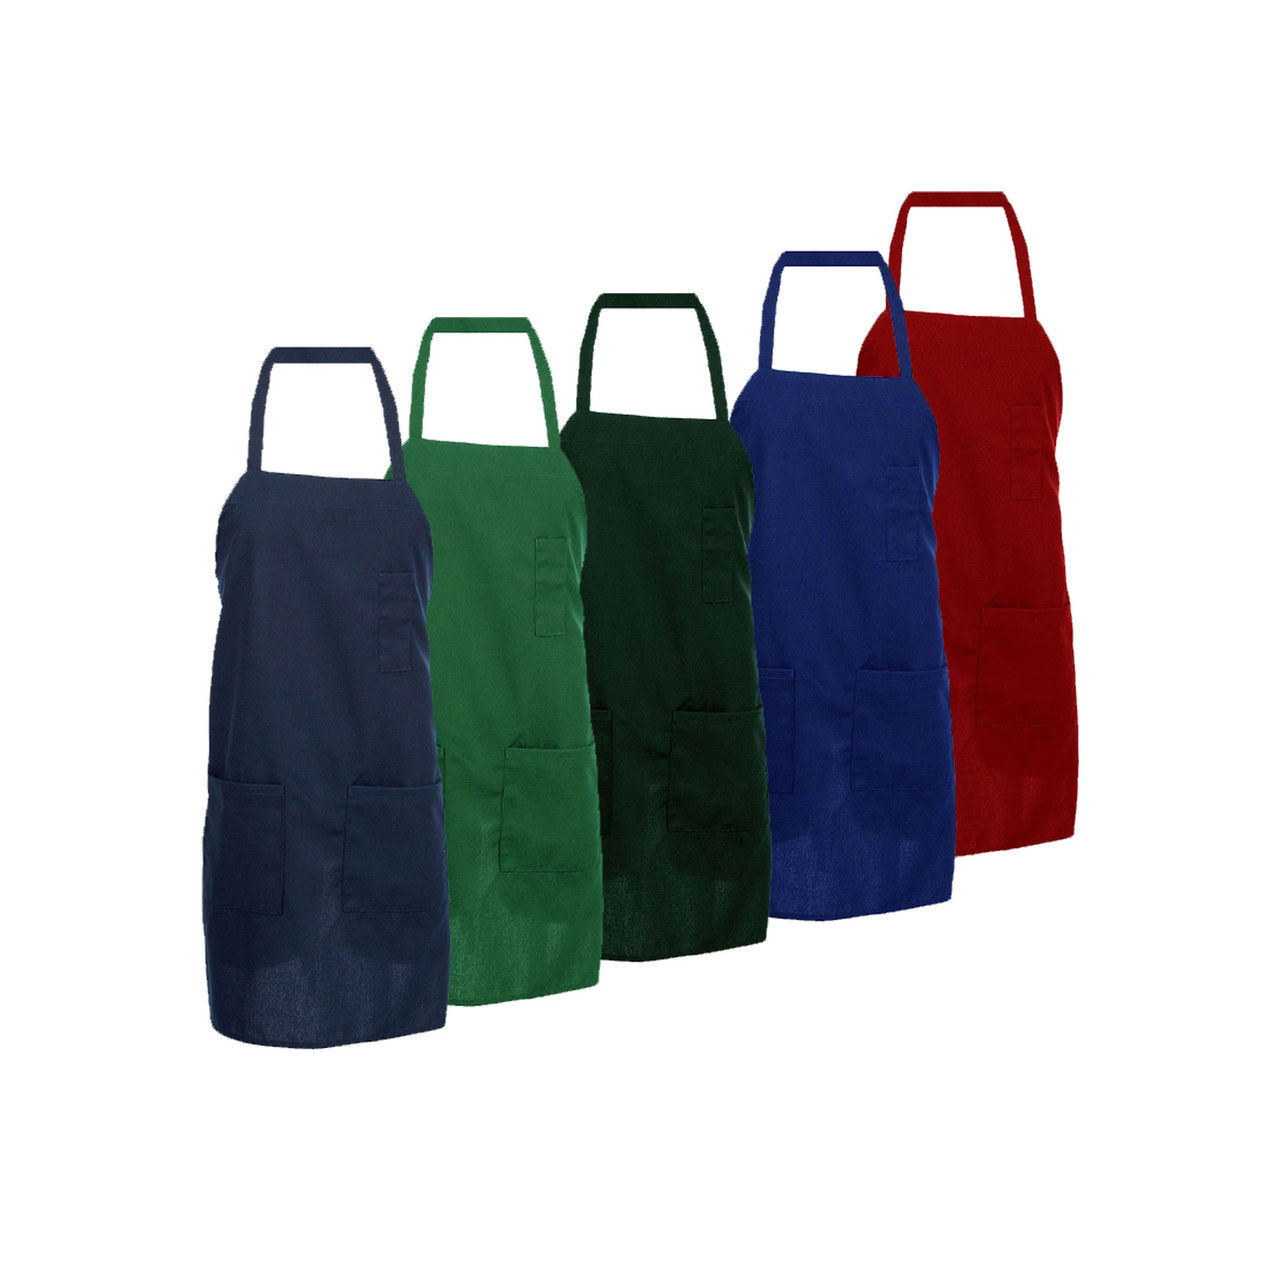 What is the design aim of the braid bib 3-Pocket Apron with Full Coverage?